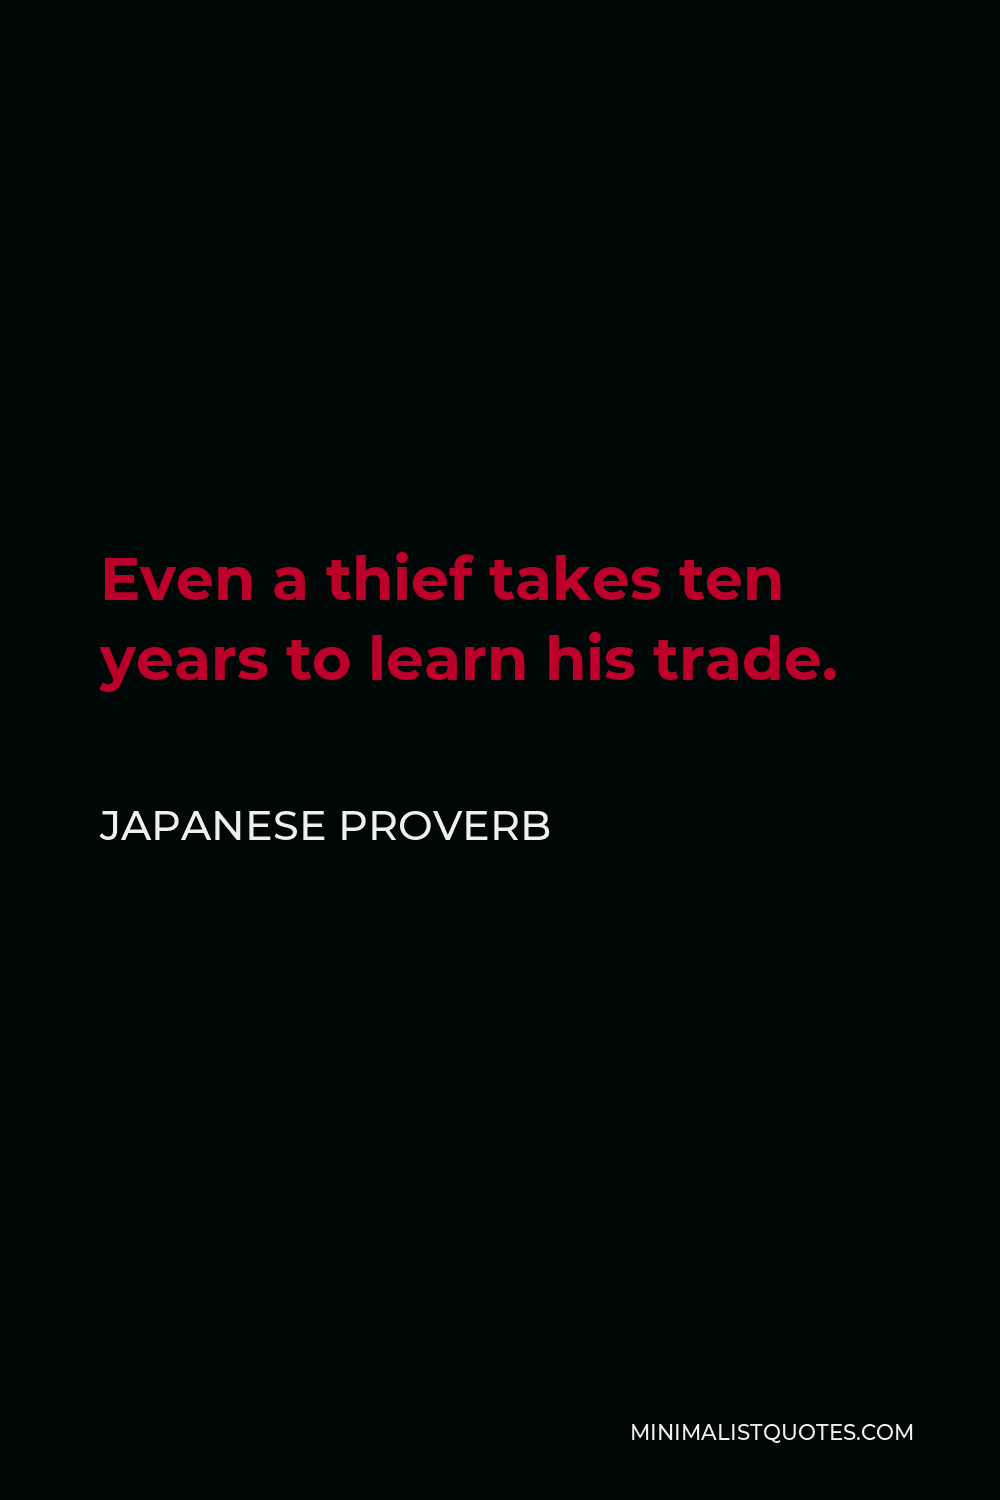 Japanese Proverb Quote - Even a thief takes ten years to learn his trade.